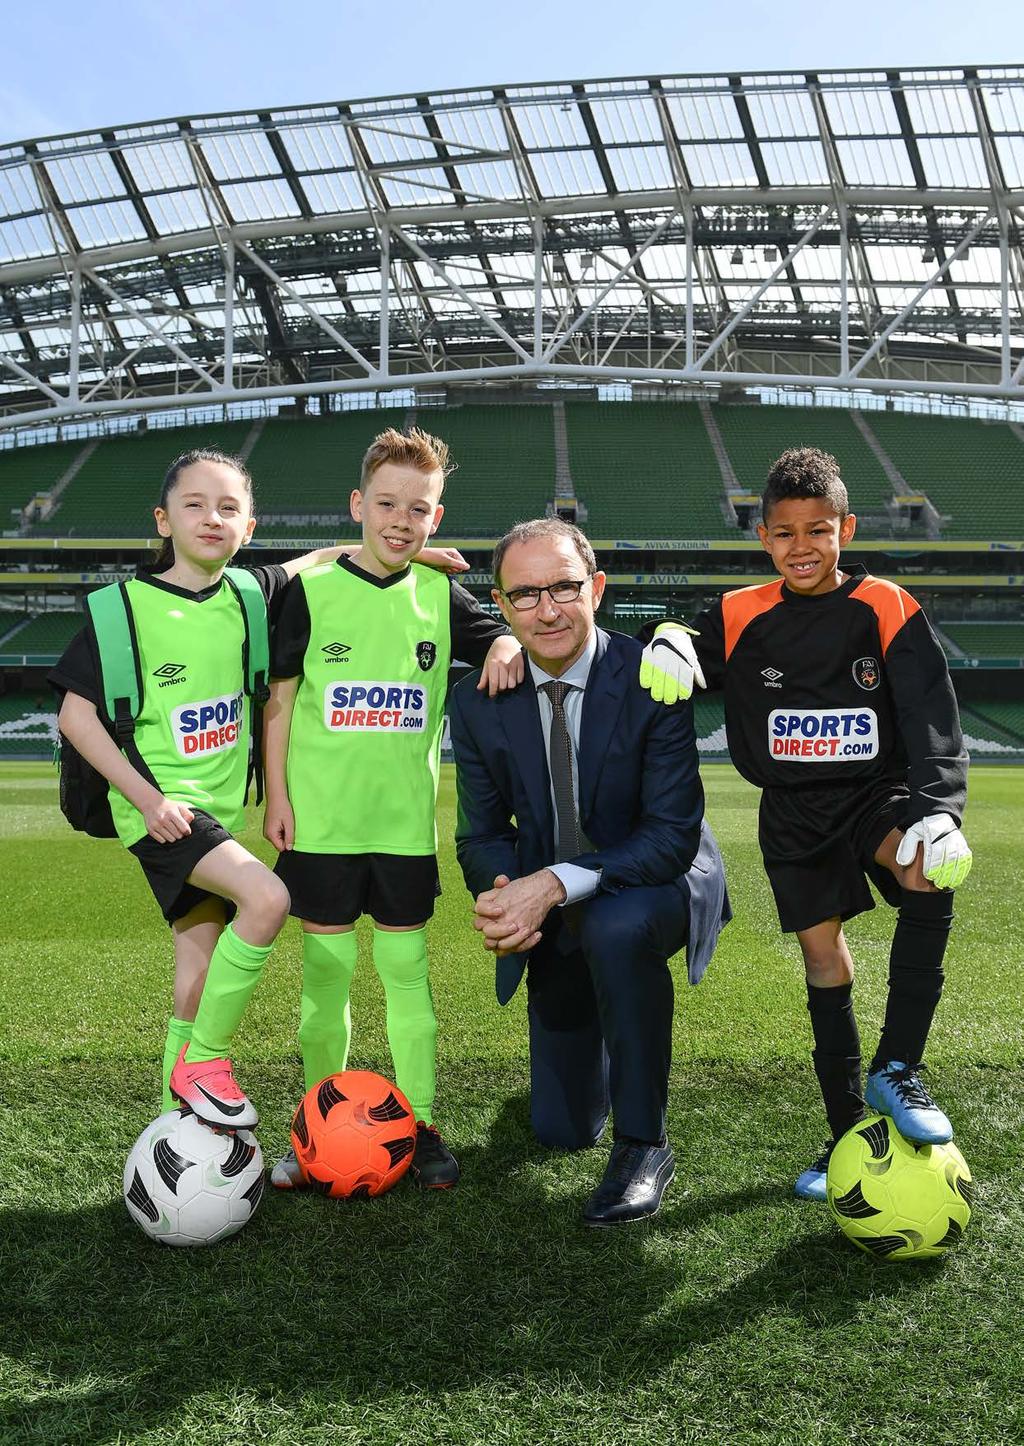 Republic of Ireland manager Martin O Neill with, from left, Emma Sherrard, Charlie